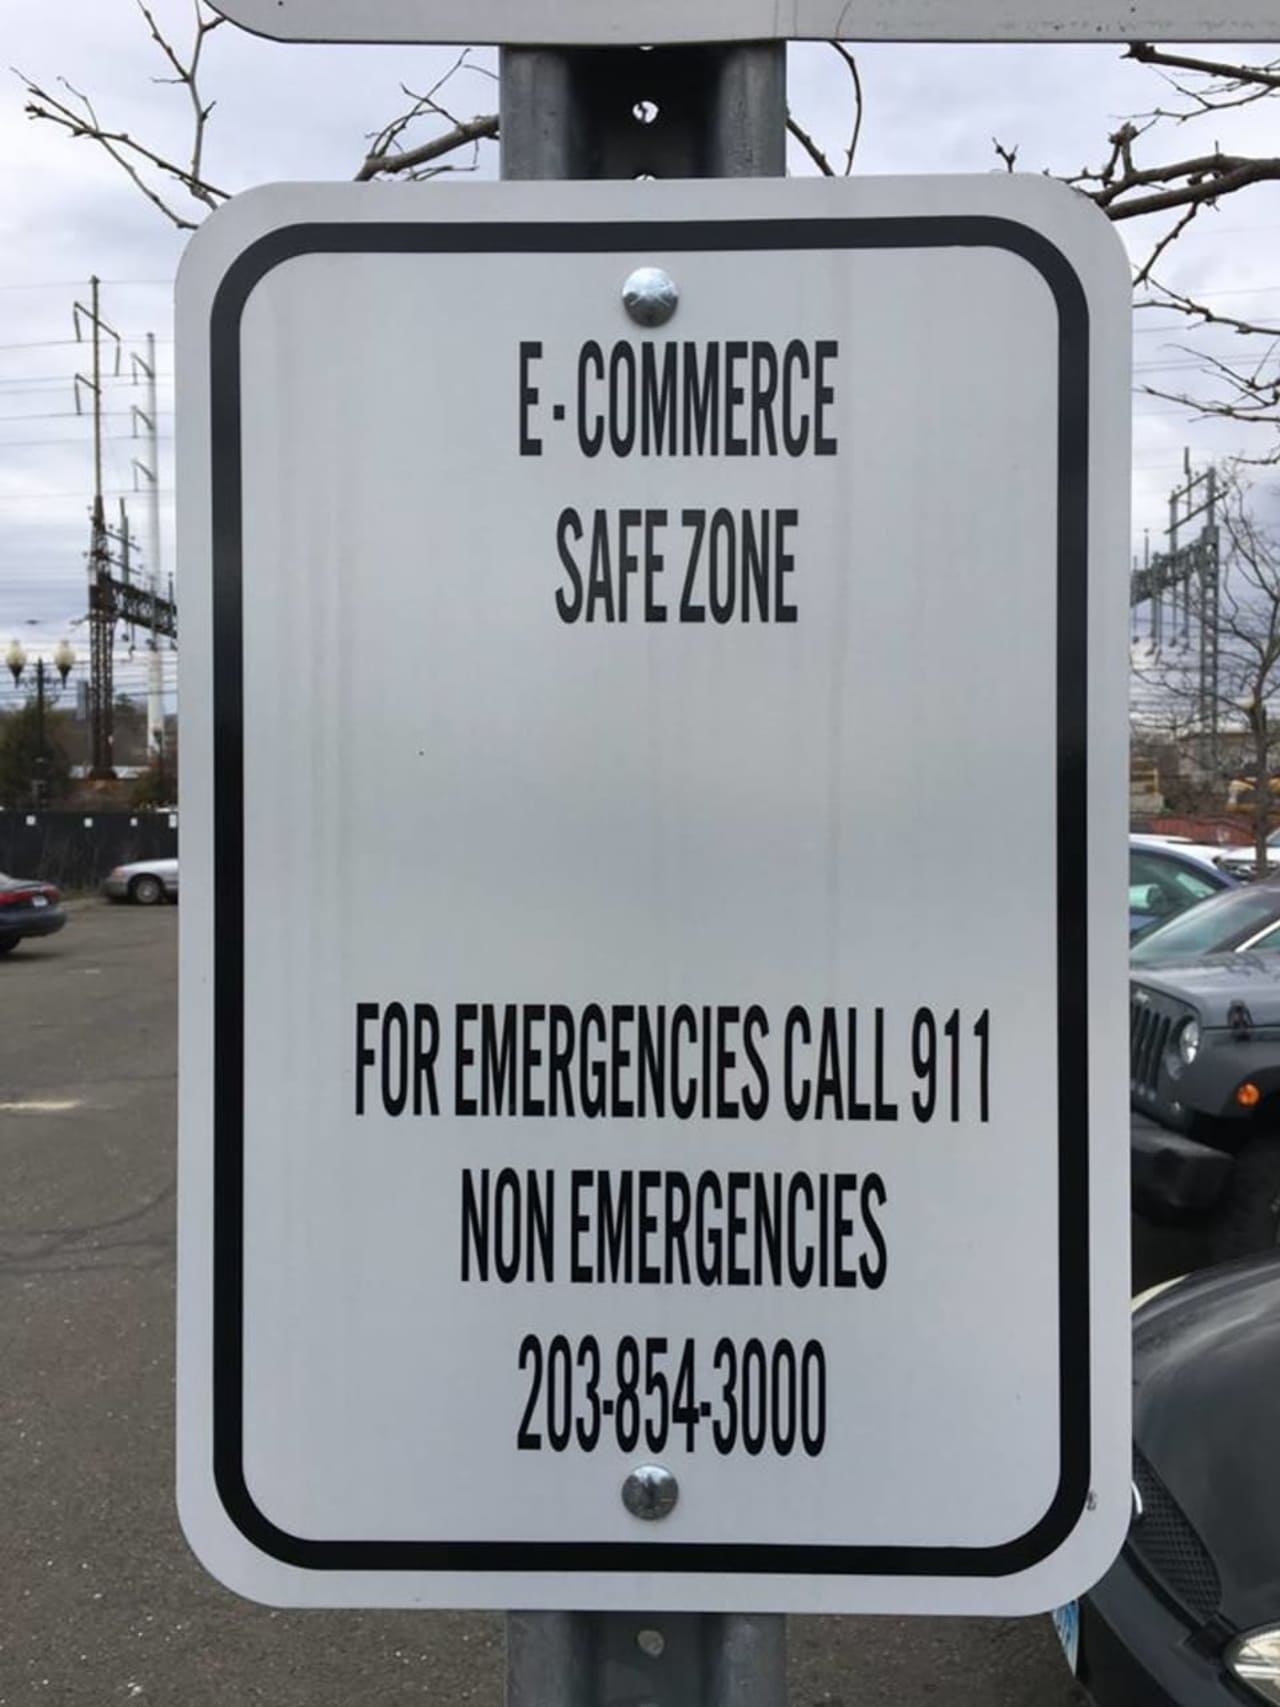 Norwalk Police have set up an E-Commerce Safe Zone in their parking lot for people to conduct transactions initiated online.